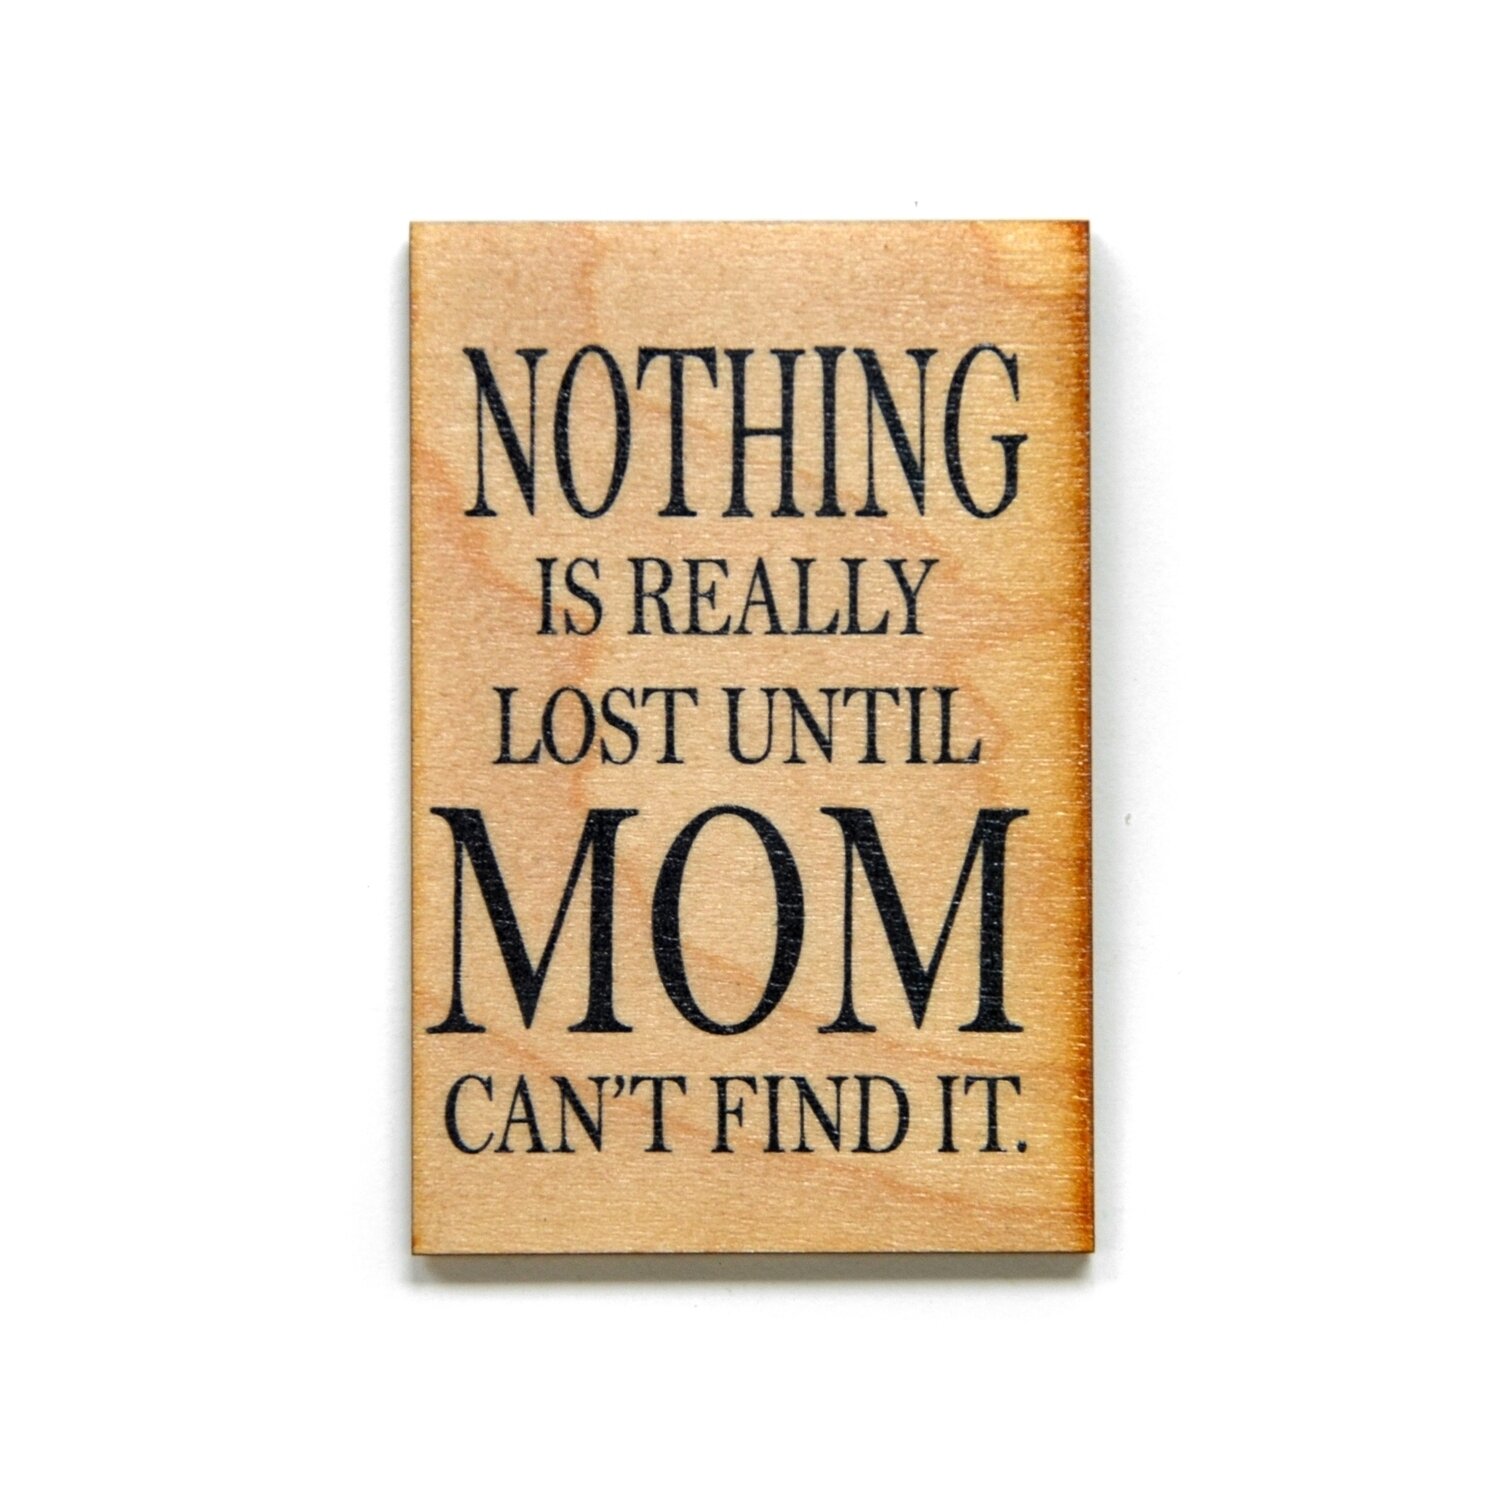 Nothing Is Really Lost Until Mom Can't Find It Wooden Magnet